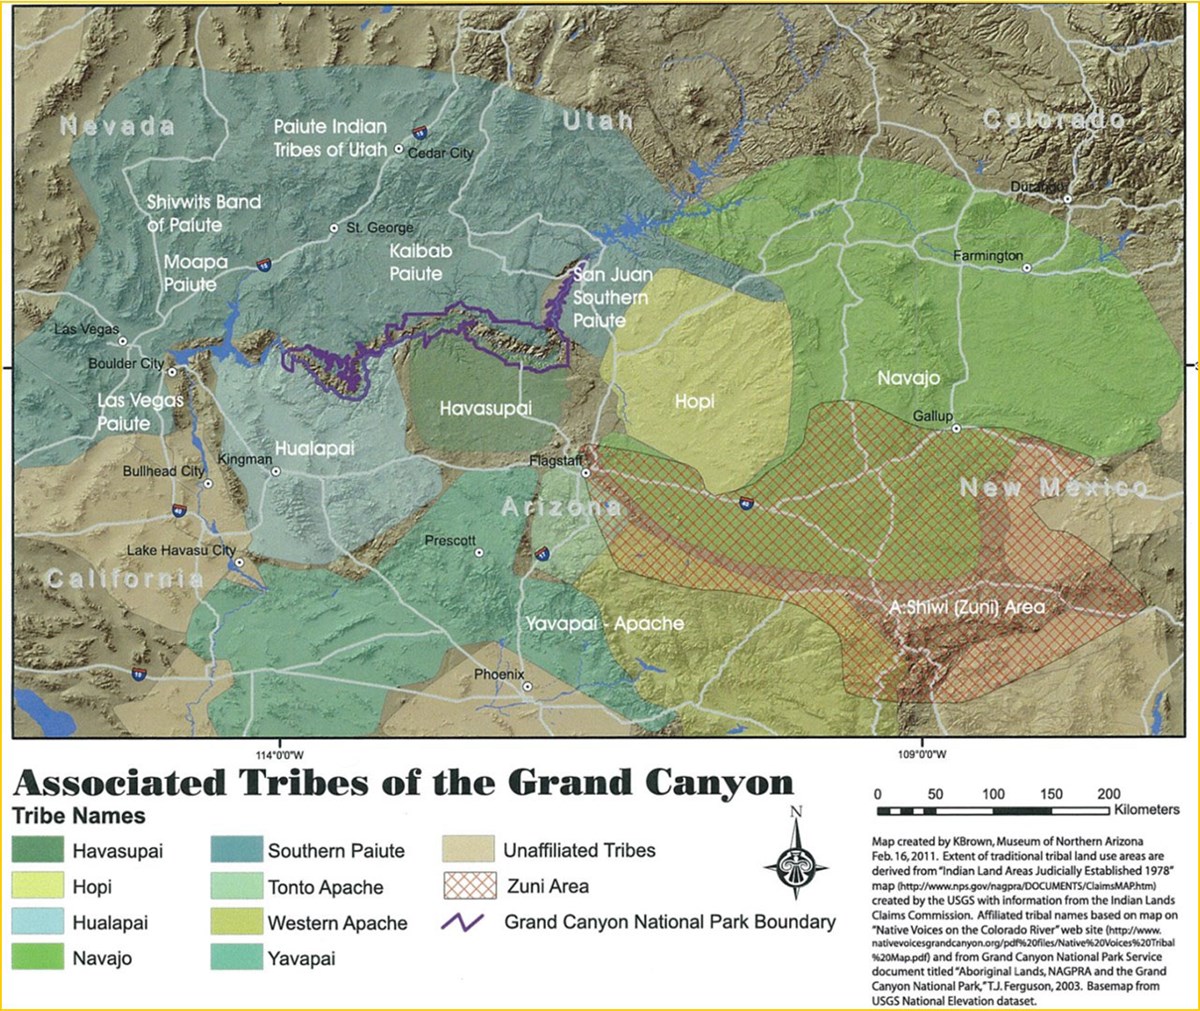 Map showing the associated tribes of the Grand Canyon region